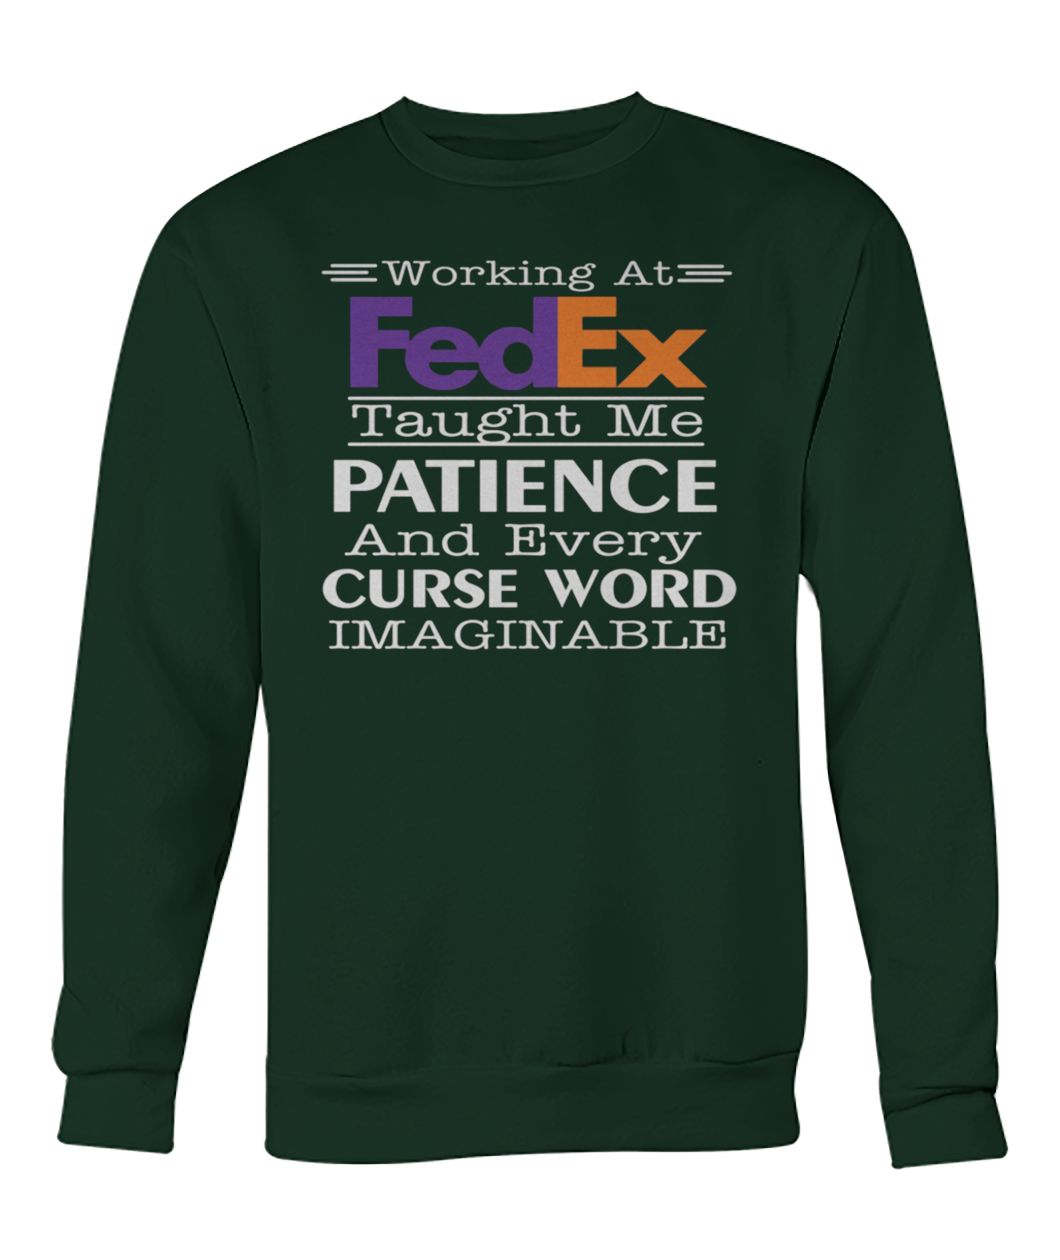 Working at fedex taught me patience and every curse word imaginable crew neck sweatshirt